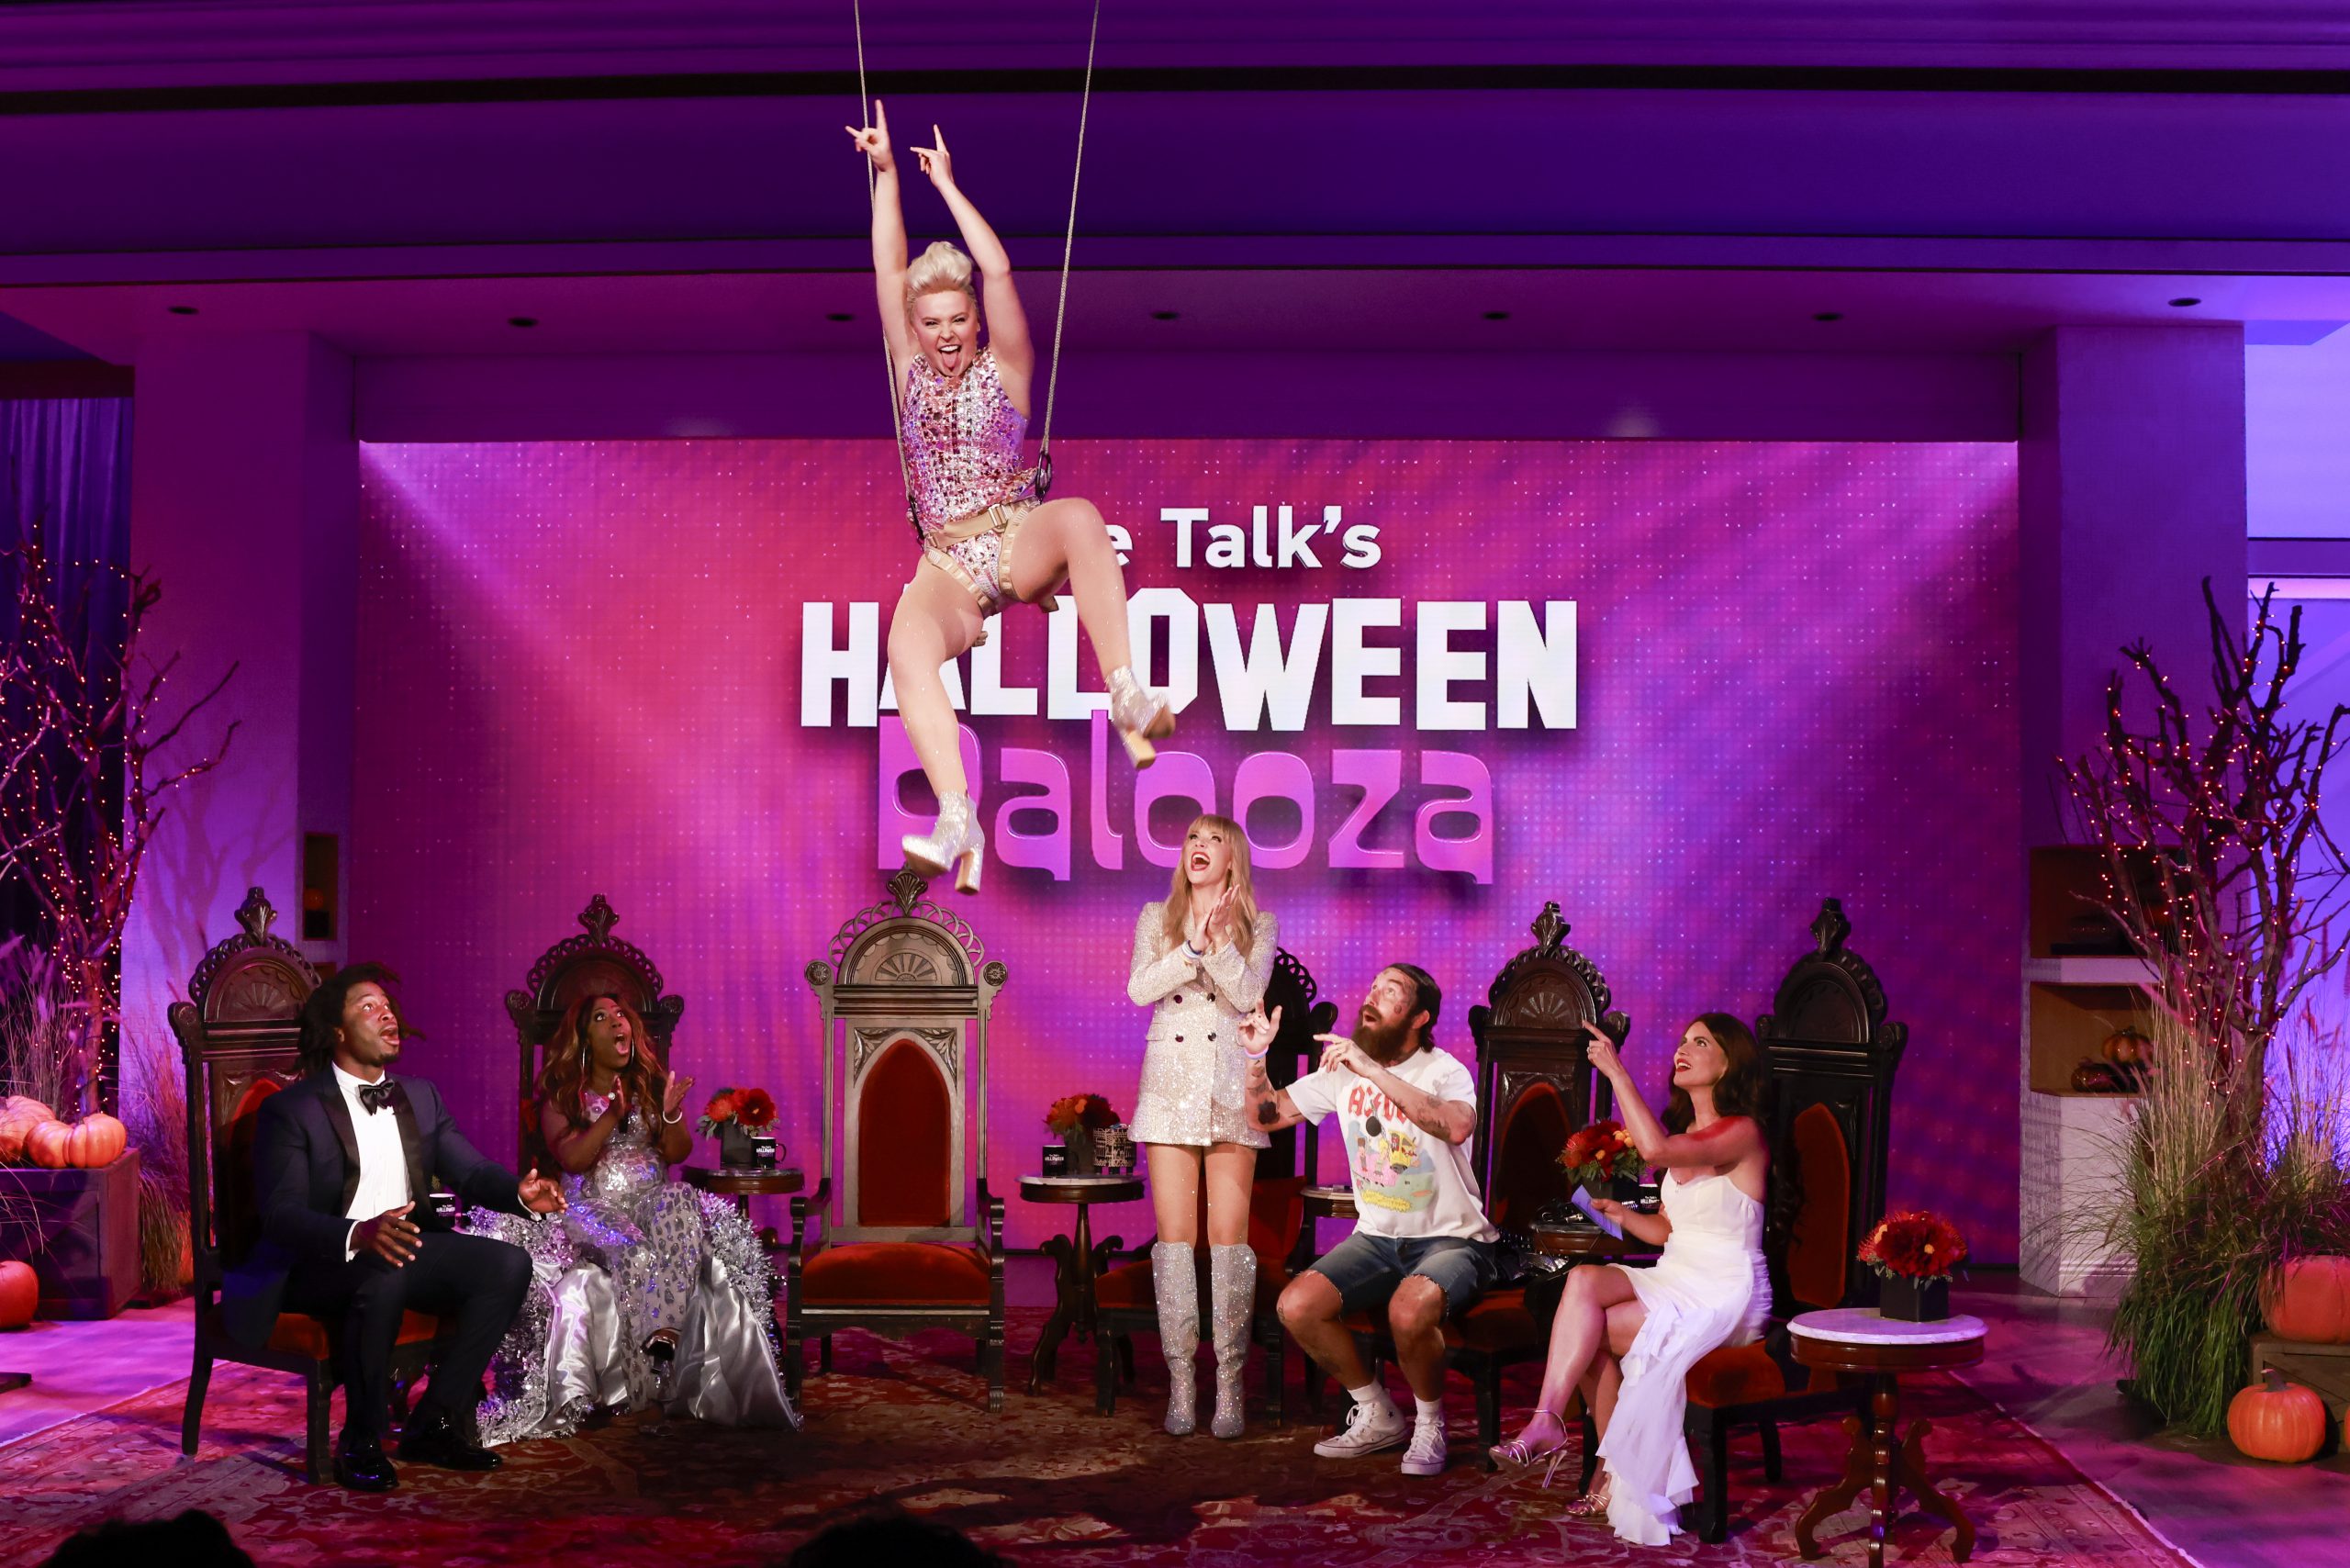 Trick or Treat - It's THE TALK’s Halloween Palooza! The hosts transform into today’s hottest music superstars Tuesday, October 31, 2023, on the CBS Television Network and Paramount+. Pictured: Akbar Gbajabiamila, Sheryl Underwood, Jojo Siwa, Taylor Swift (Amanda Kloots), Jerry O’Connell and Natalie Morales. Photo: Sonja Flemming/CBS ©2023 CBS Broadcasting, Inc. All Rights Reserved.